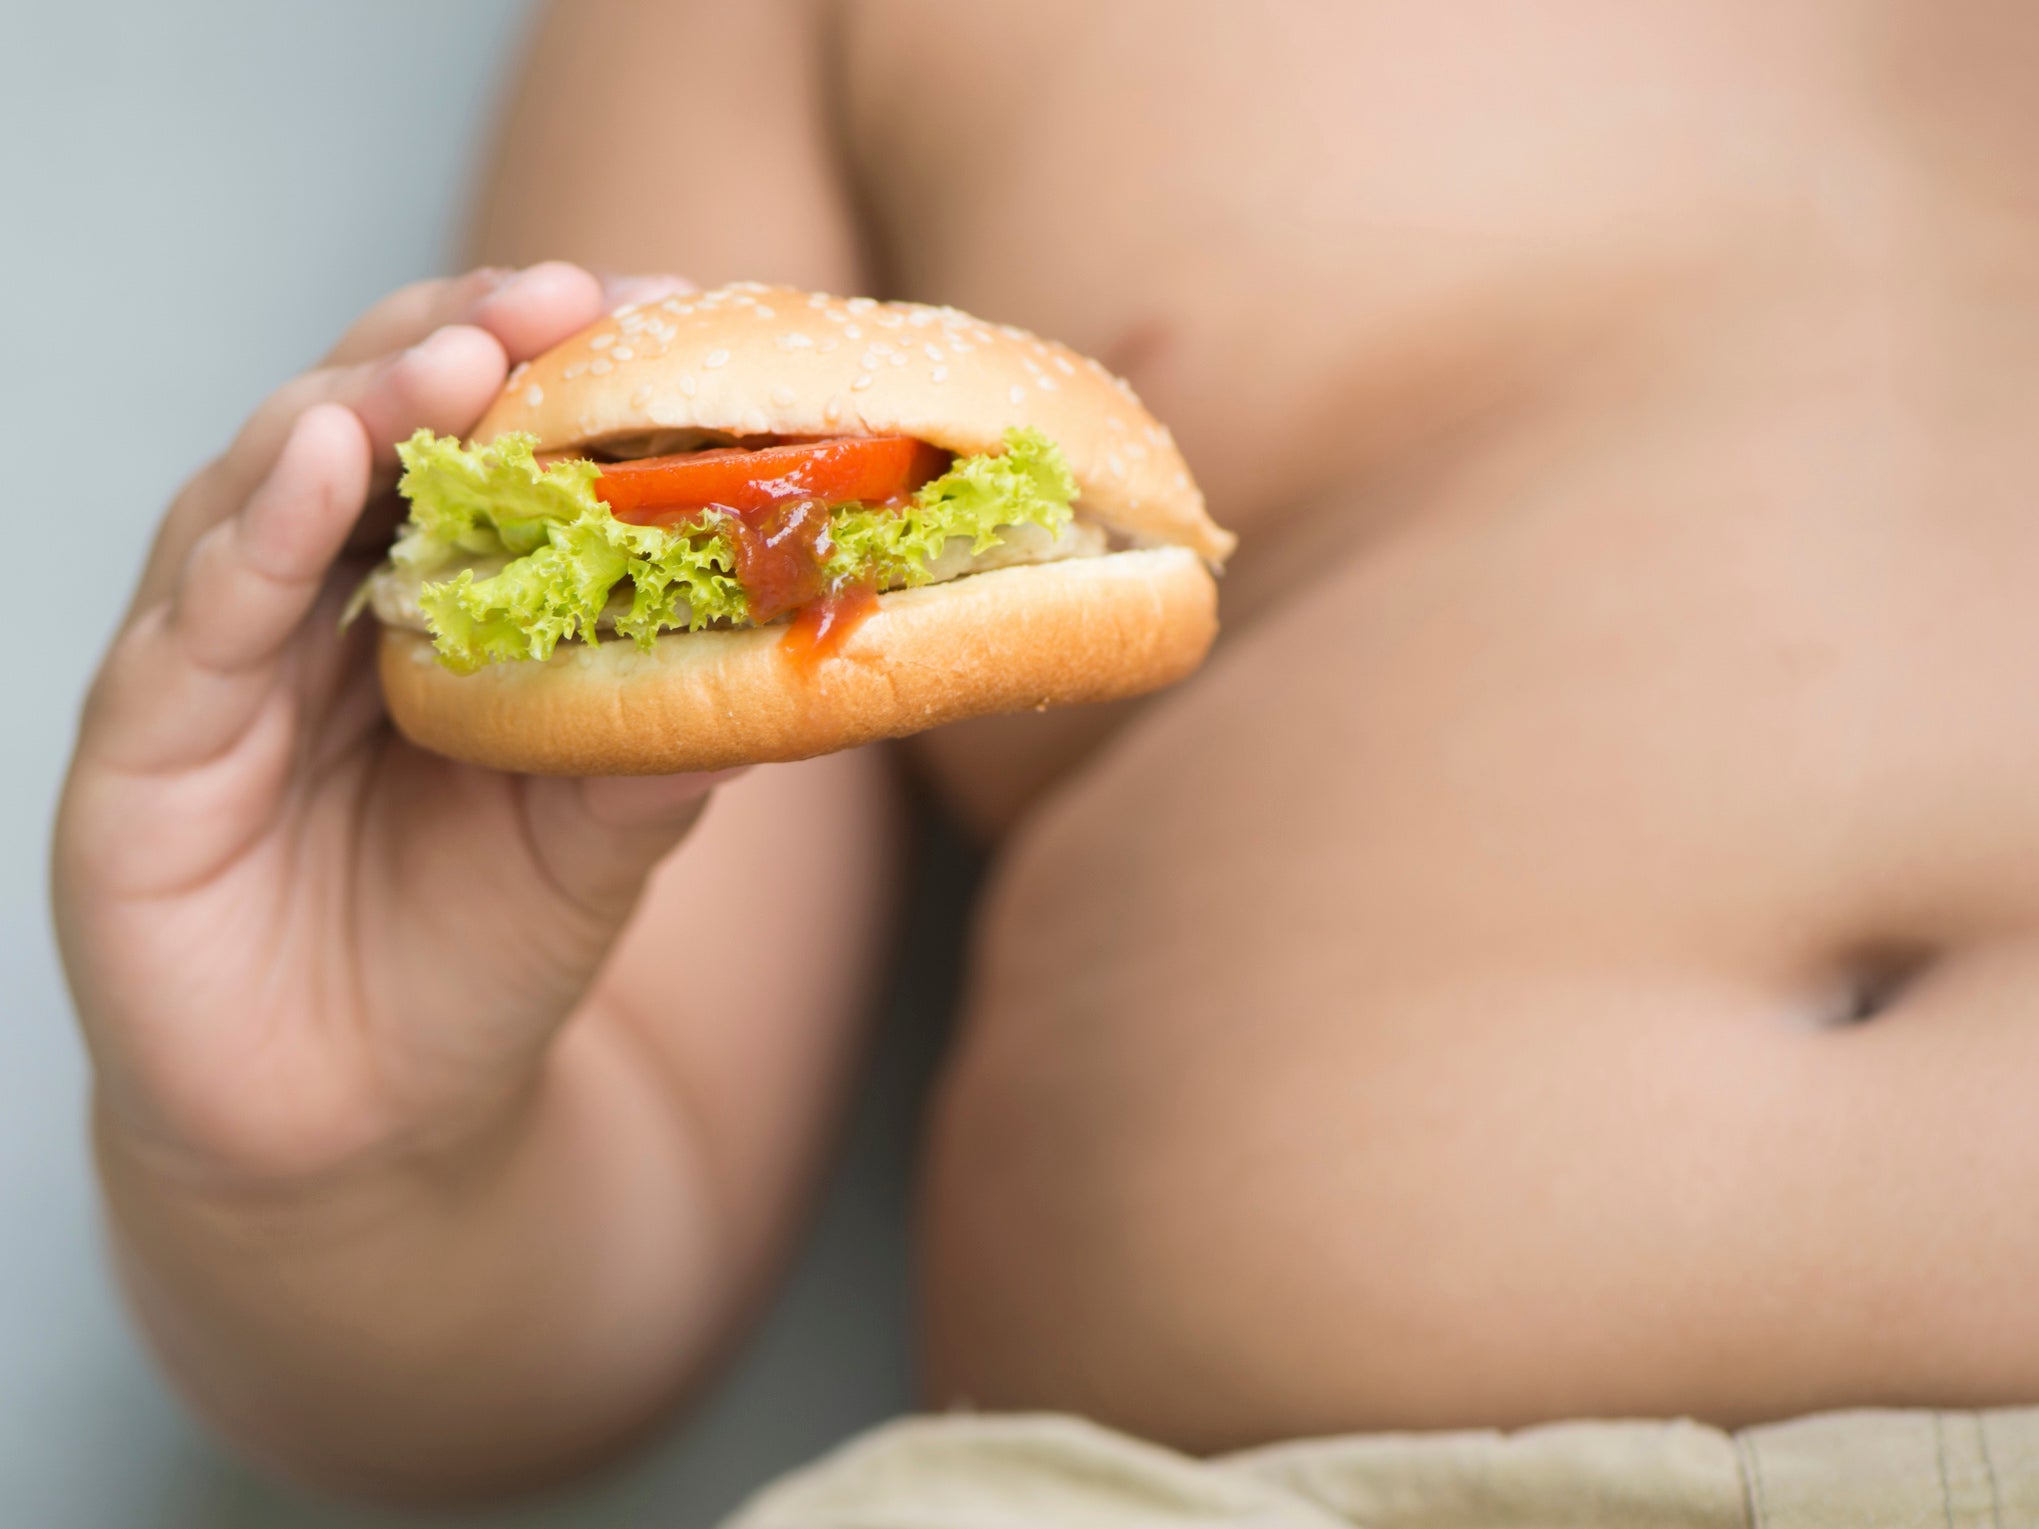 Tokyo's new naked restaurant will not welcome obese customers